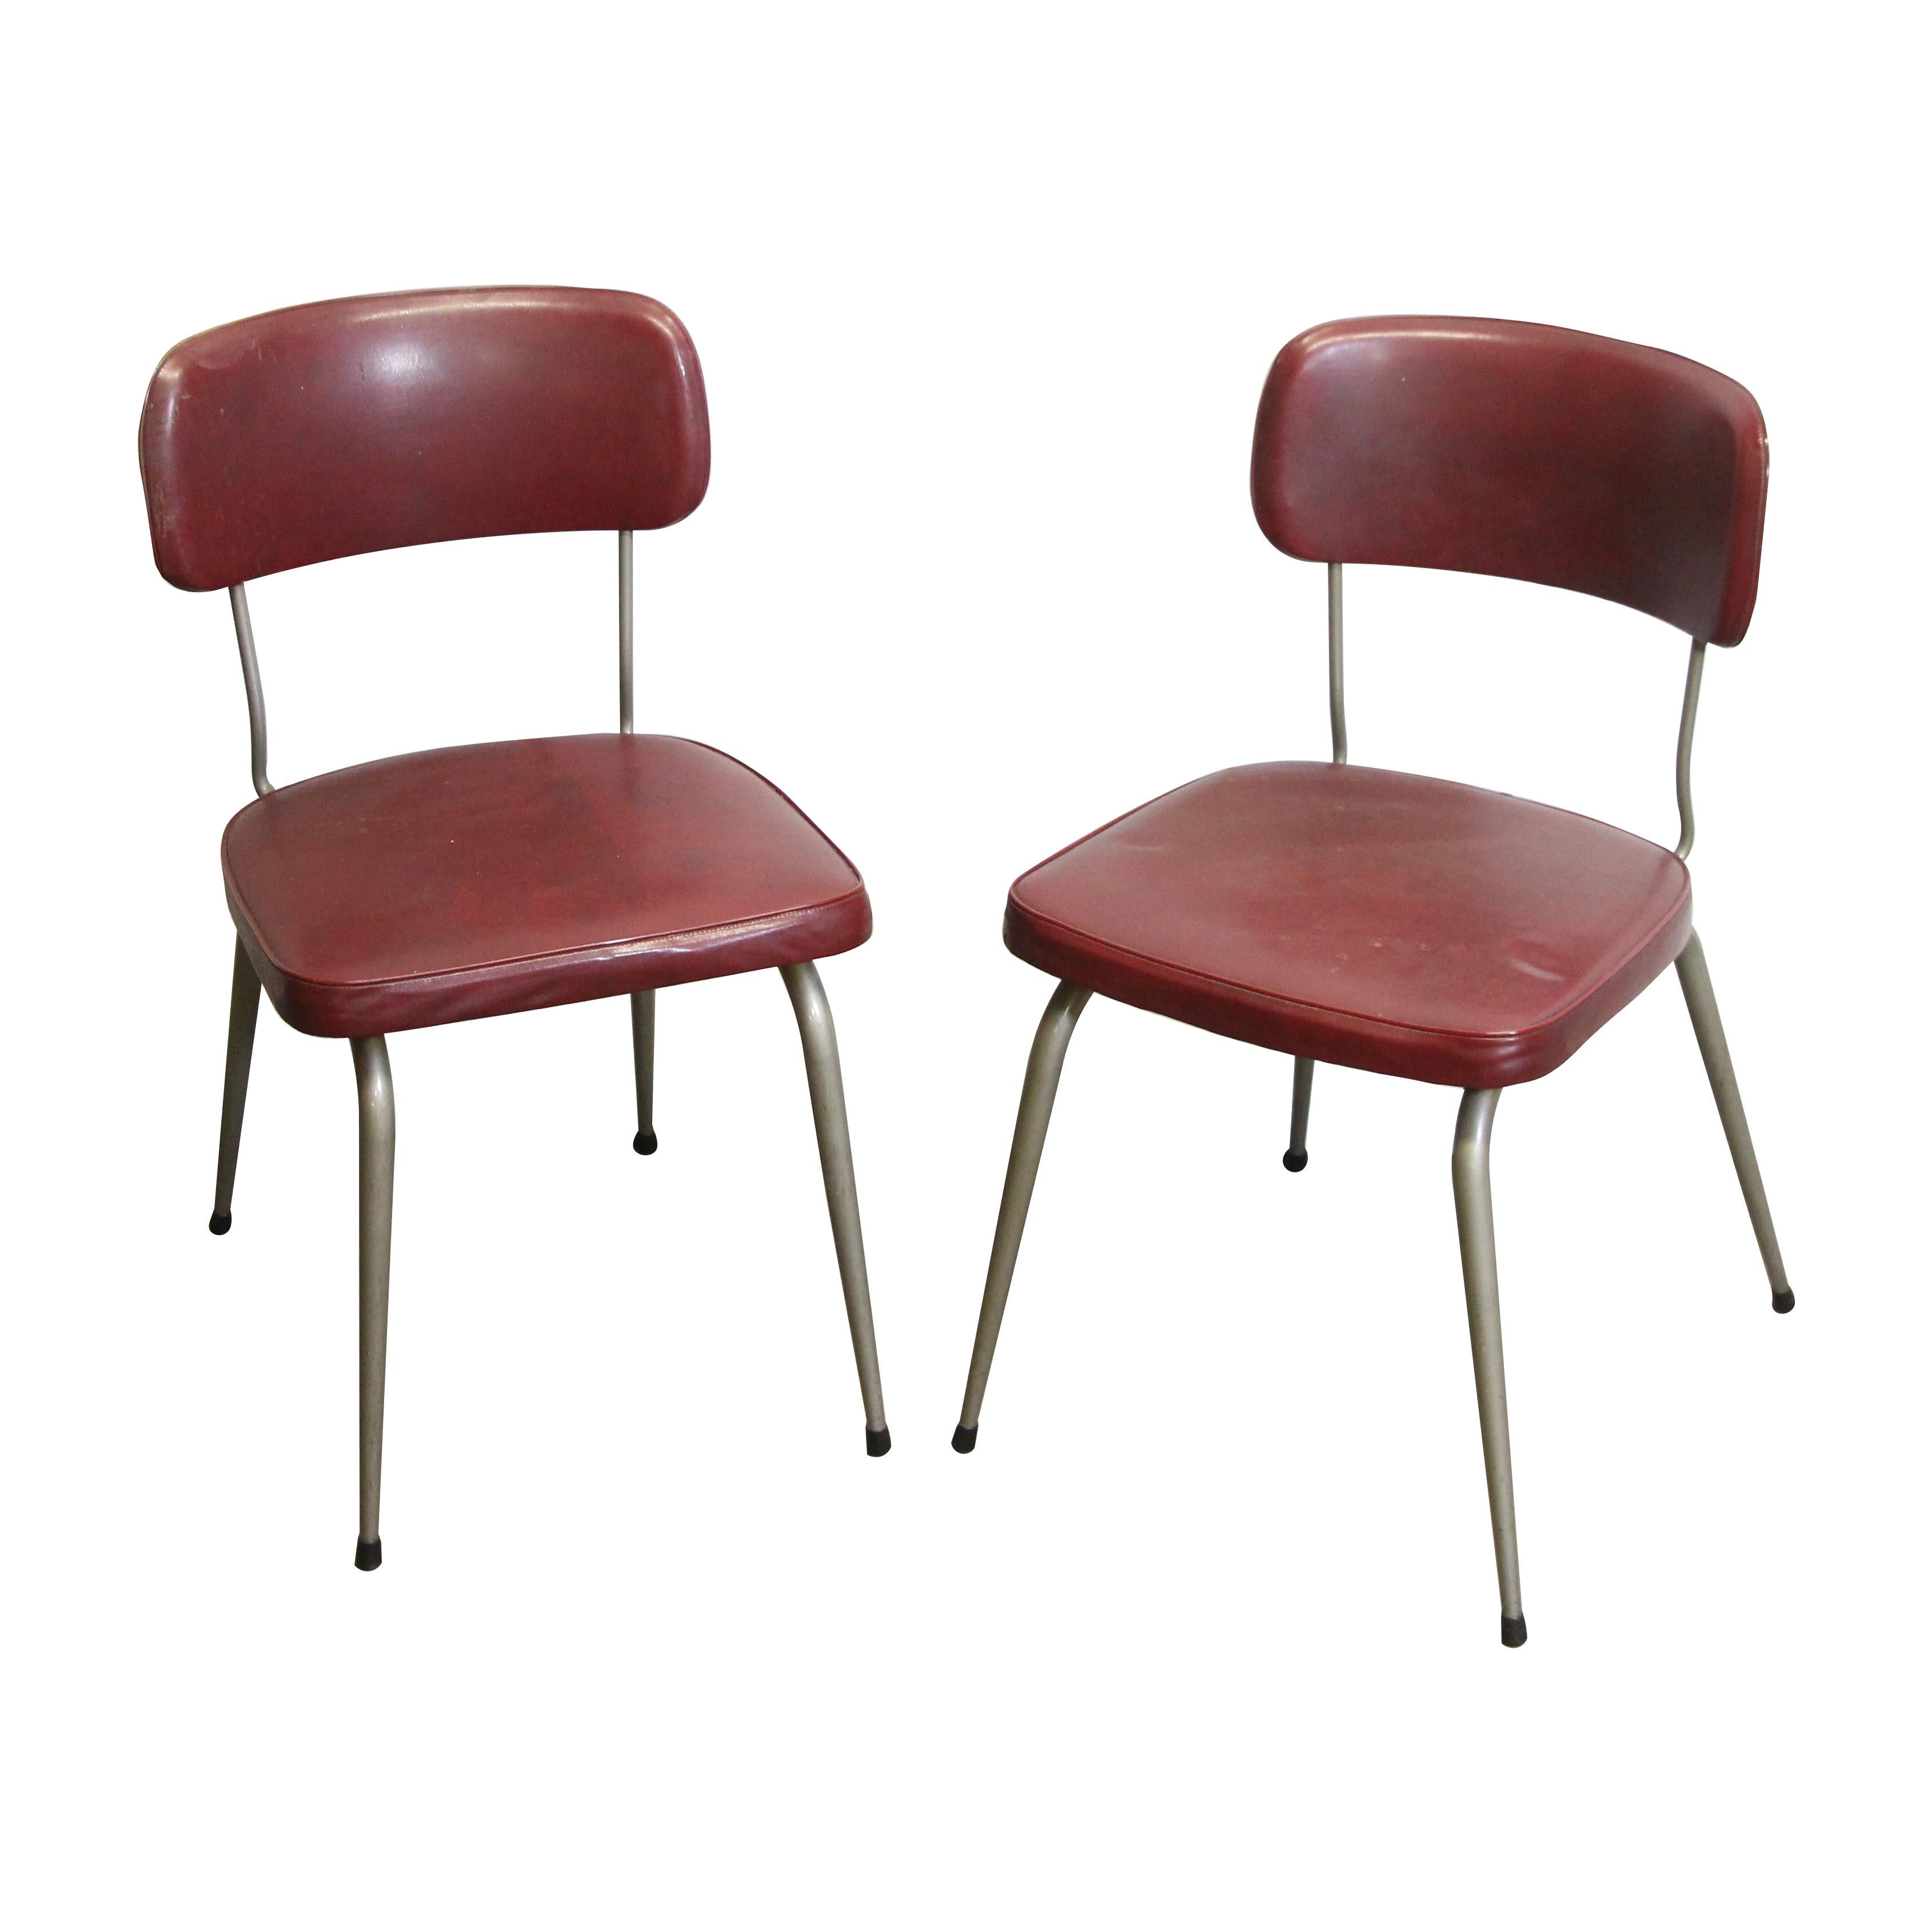 Pair of 1950's chairs from Belgium with burgundy colored vinyl seats and metal legs made by Strafor. The back is stamped Acior Trooz- (Belgique). Priced as a pair. Please note, this item is located in our Los Angeles location.